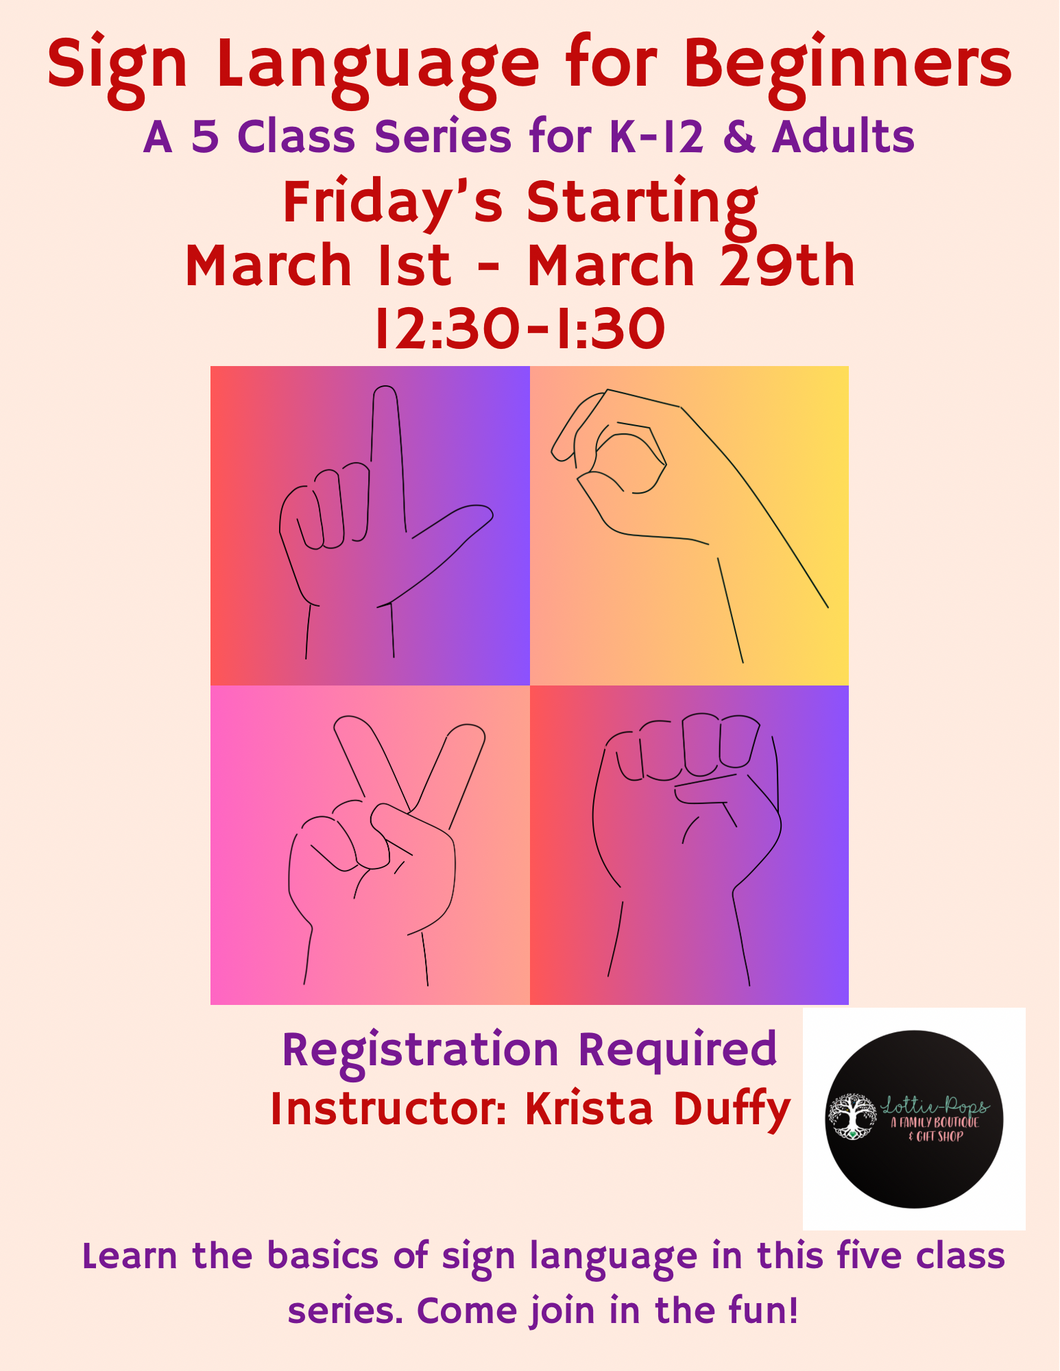 Sign Language for beginners-Session 2    5 sessions: Friday’s March 1-March 29